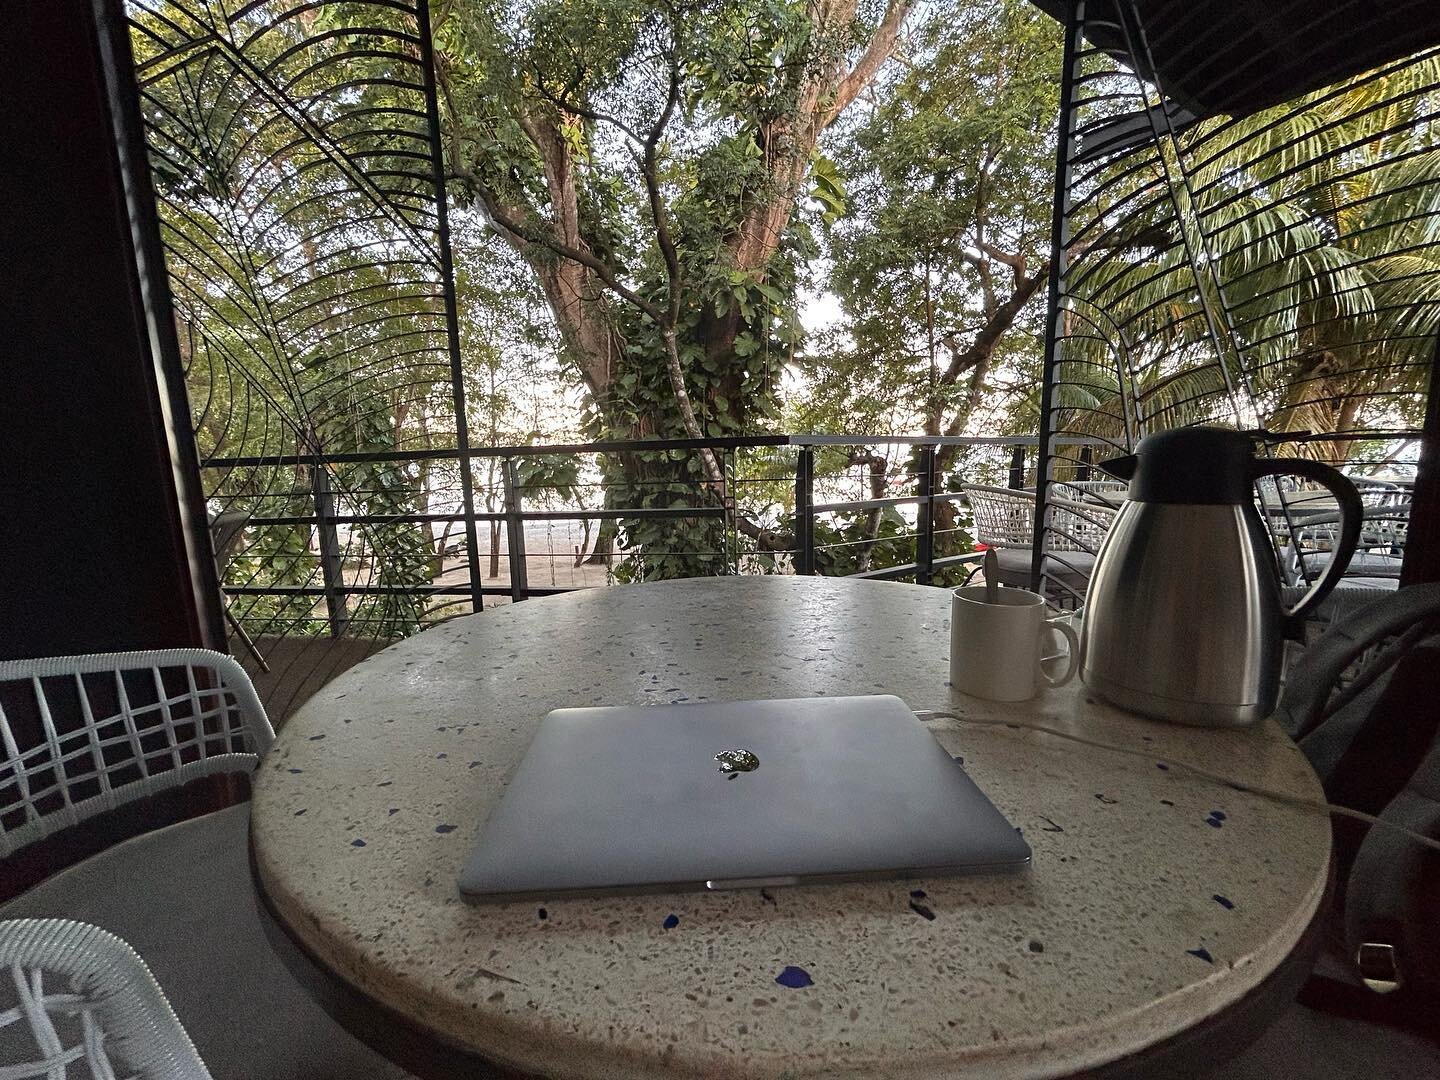 6:30am. Hermosa Beach, Costa Rica.
Time to get into a bit of PECO planning done for the year ahead. Enjoying my very-temporary office with a view.